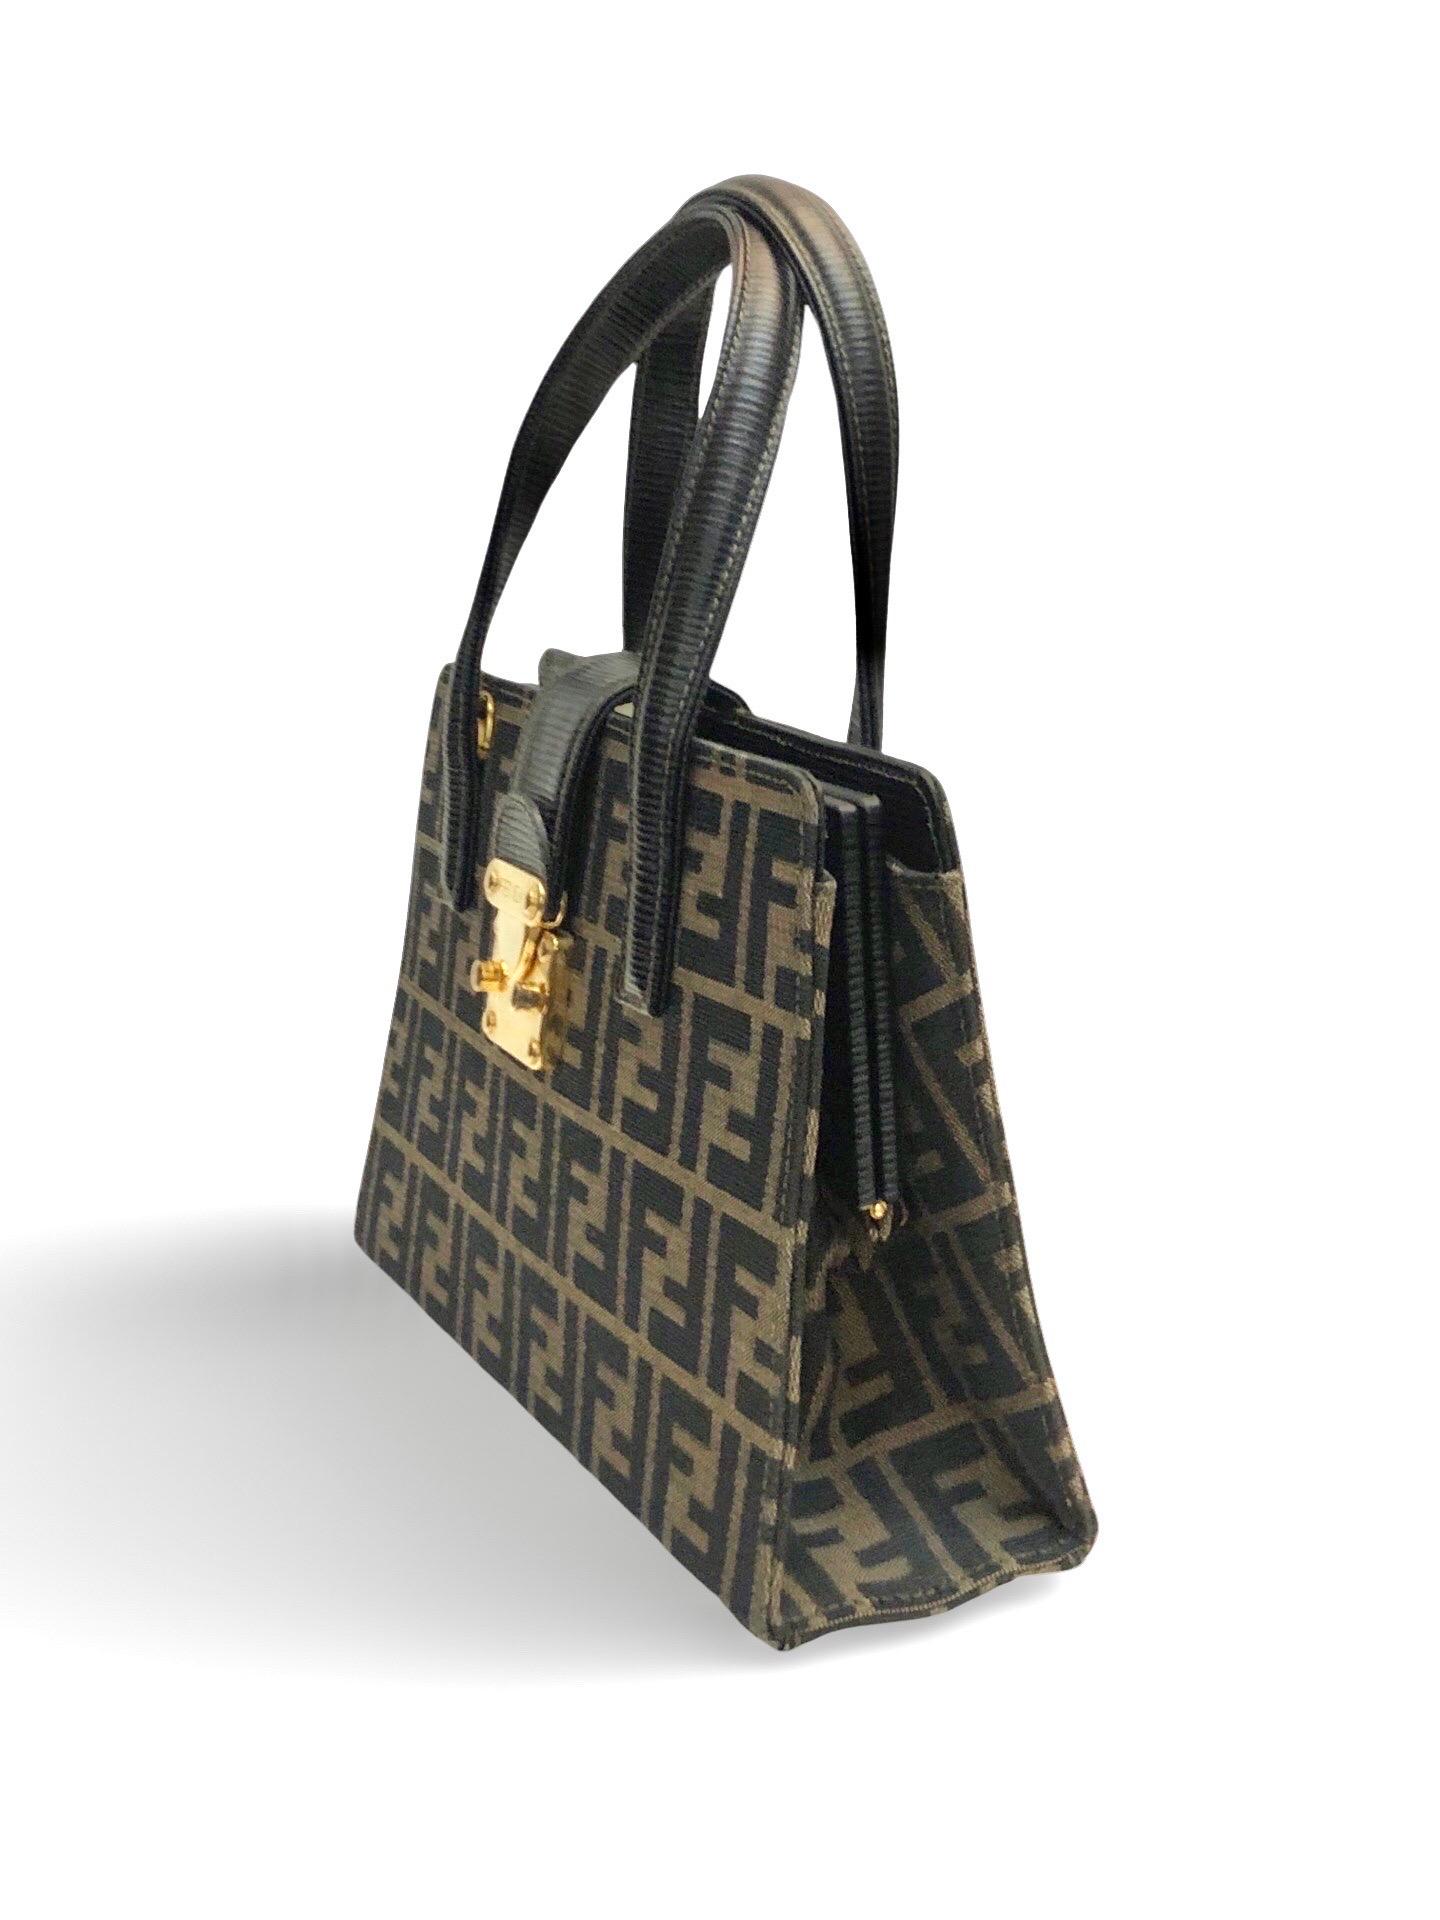 Rare Fendi Zucca Print Canvas Leather Handle Handbag In Excellent Condition For Sale In Sheung Wan, HK